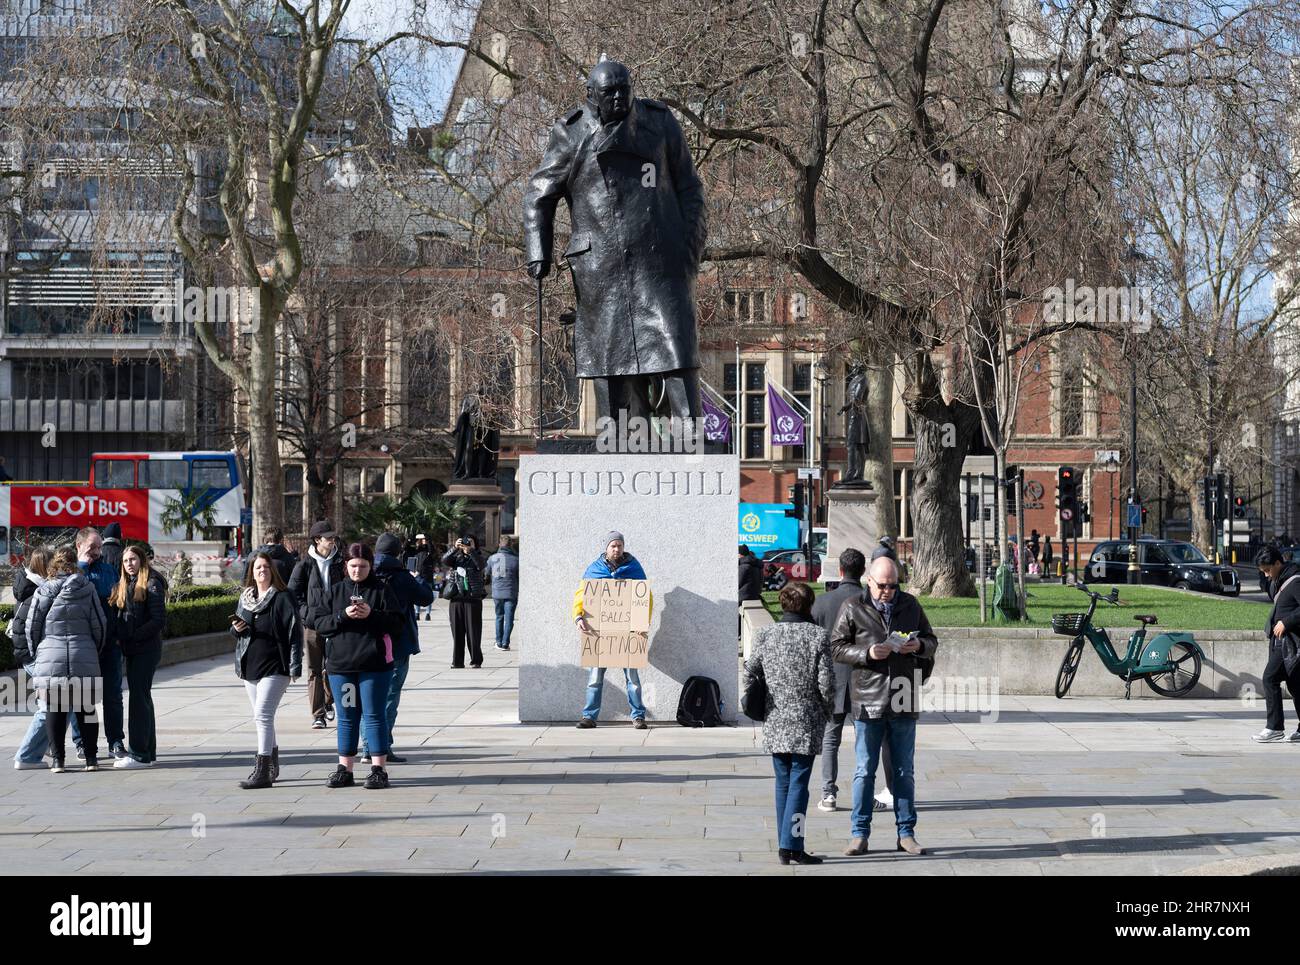 Parliament Square, London, UK. 25 February 2022. A ,  in Parliament Square on day 2 of the invasion by Russia, draped in a Ukraine flag. He holds a placard urging NATO to act now. Credit: Malcolm Park/Alamy Live News Stock Photo